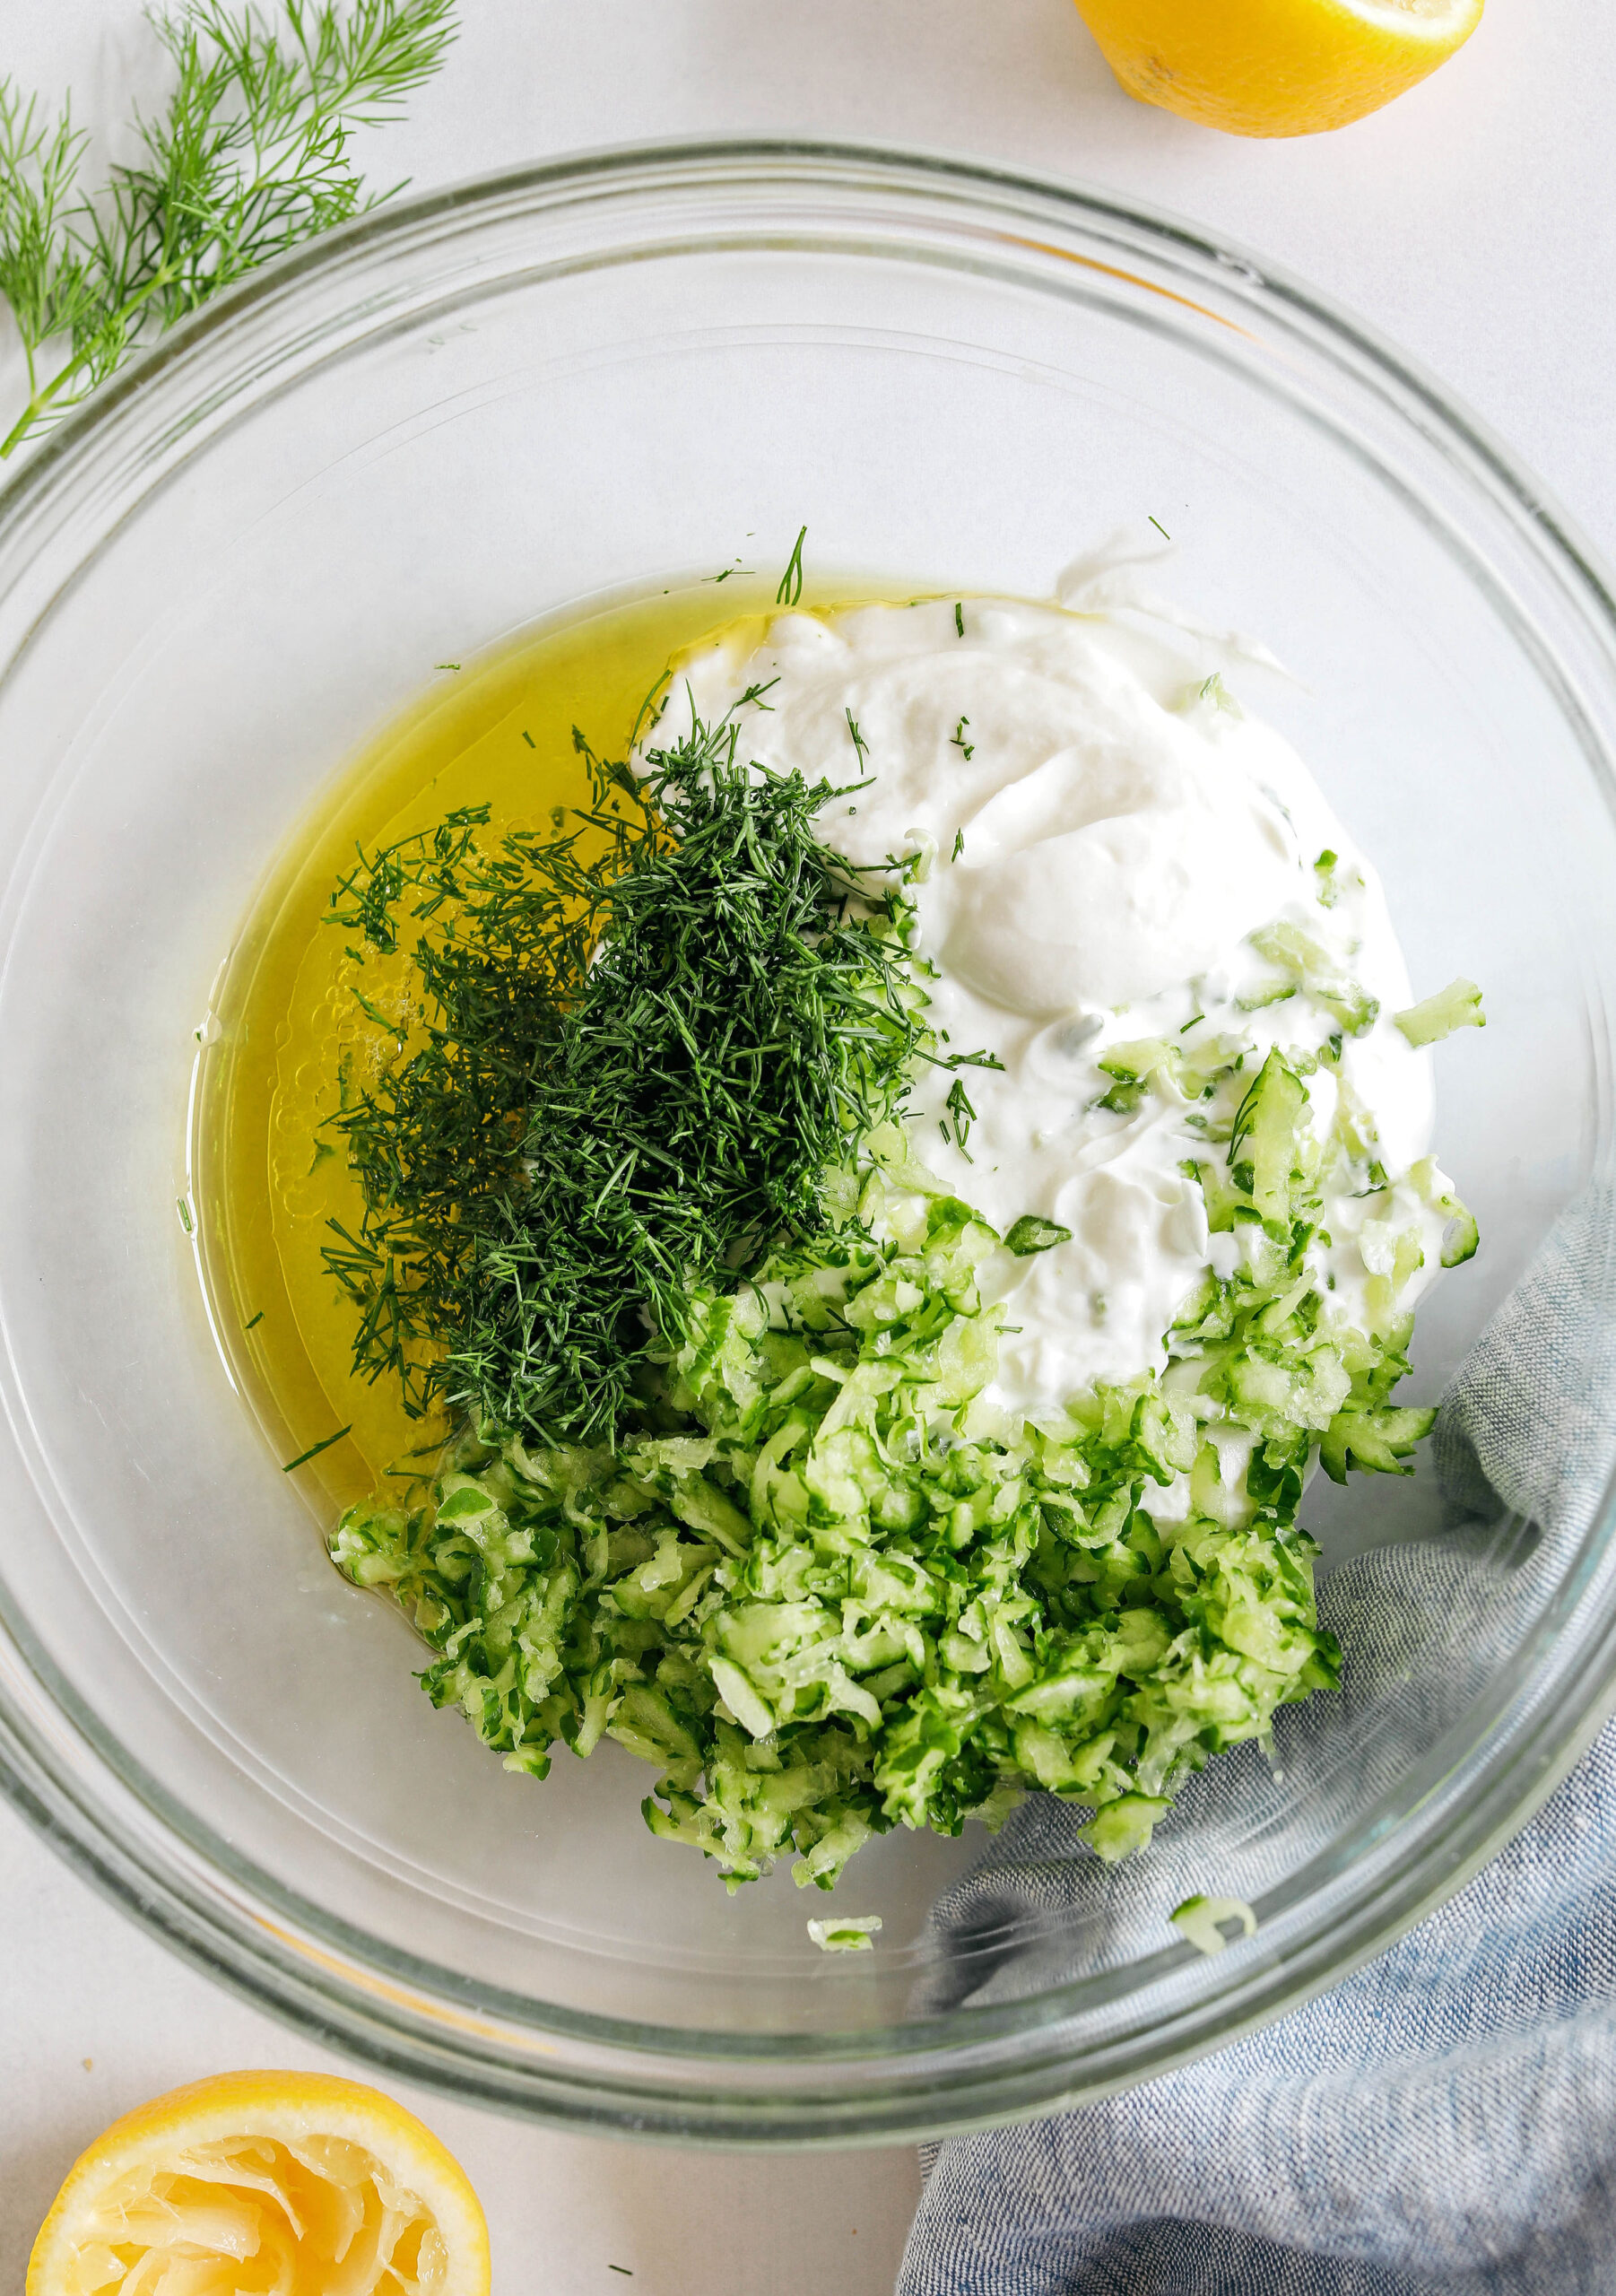 Fresh and flavorful Homemade Tzatziki Sauce is a creamy yogurt-based sauce perfect for the summer served with kabobs, grilled veggies, pita bread and more!  This recipe is easily made in just 5 minutes with a few simple ingredients!